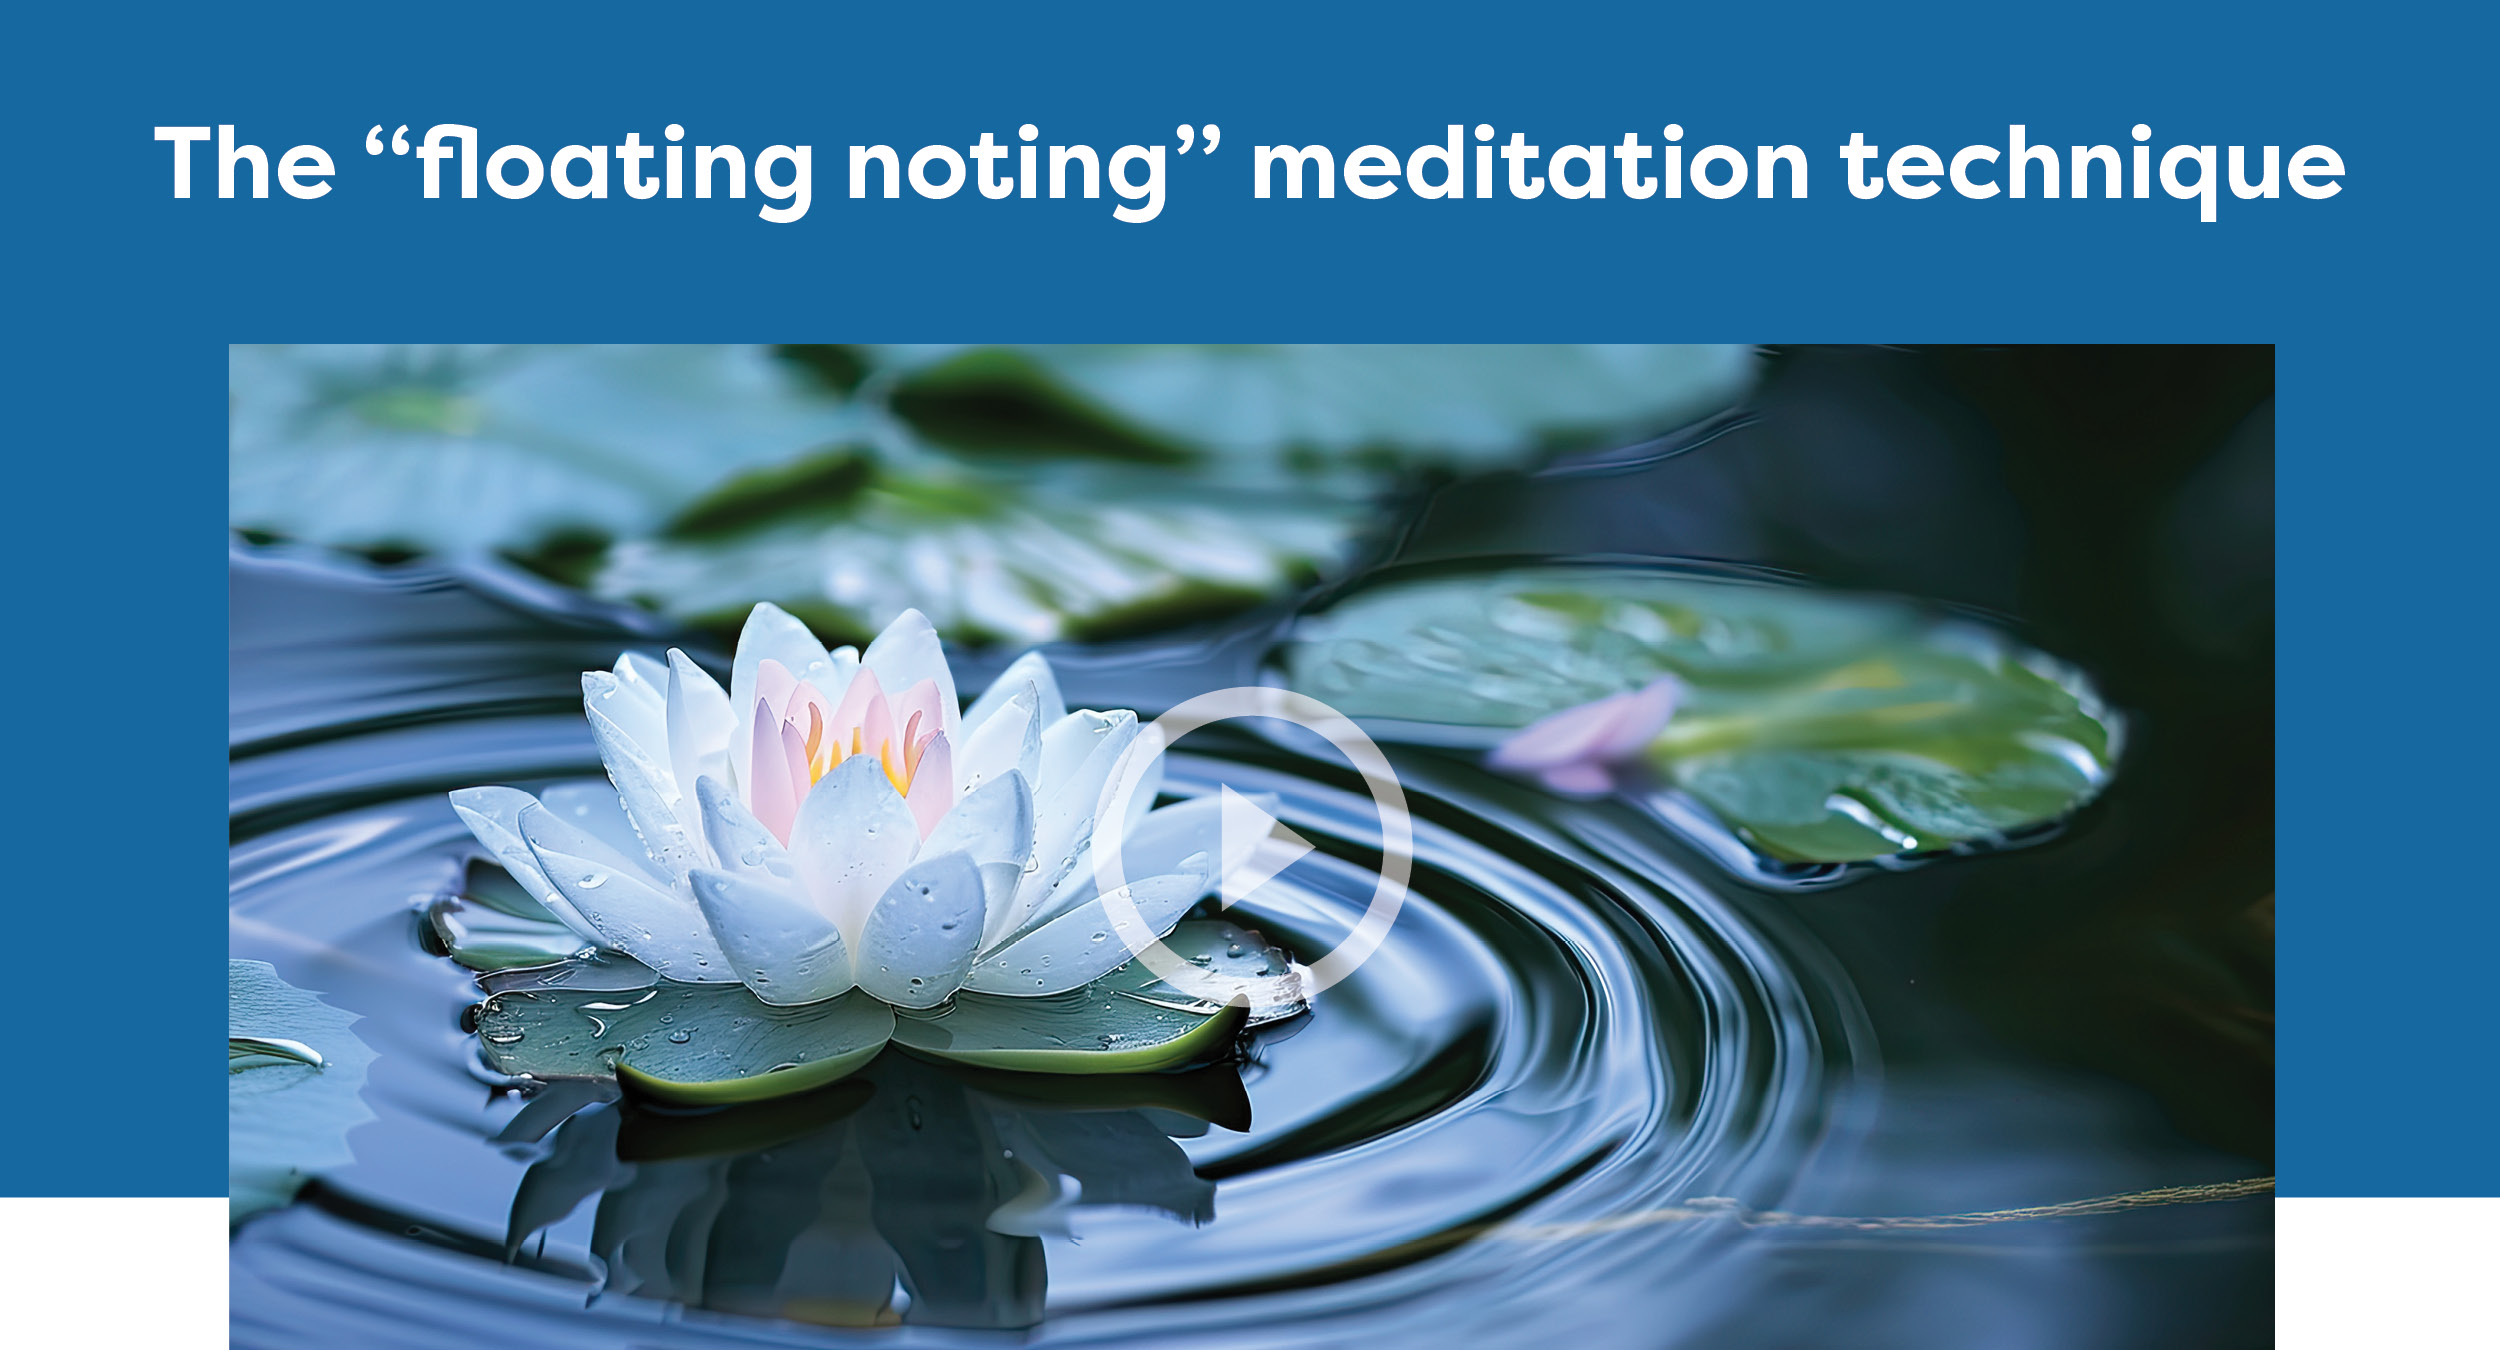 The "floating noting" meditation technique